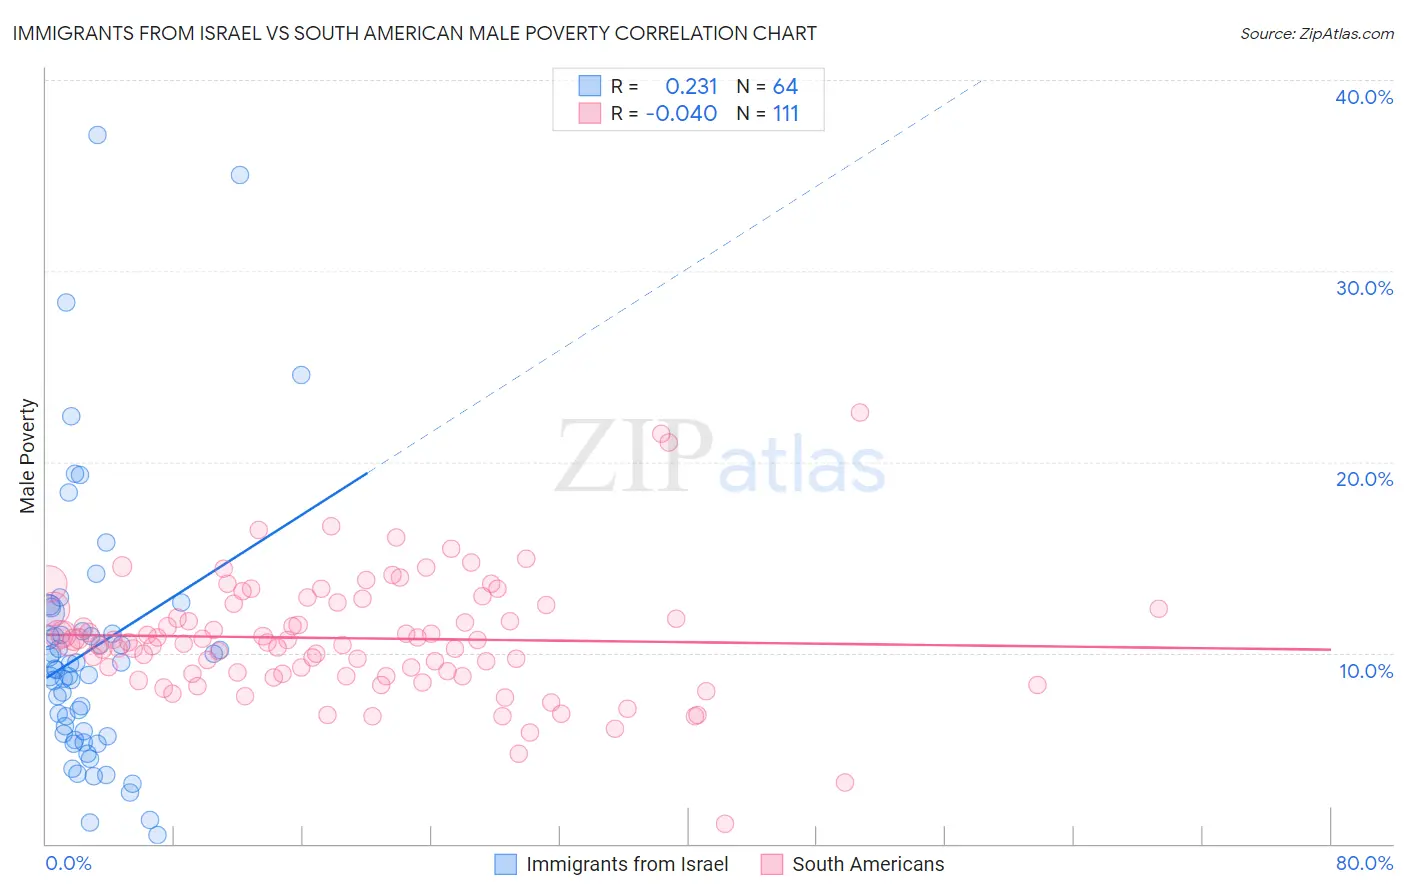 Immigrants from Israel vs South American Male Poverty